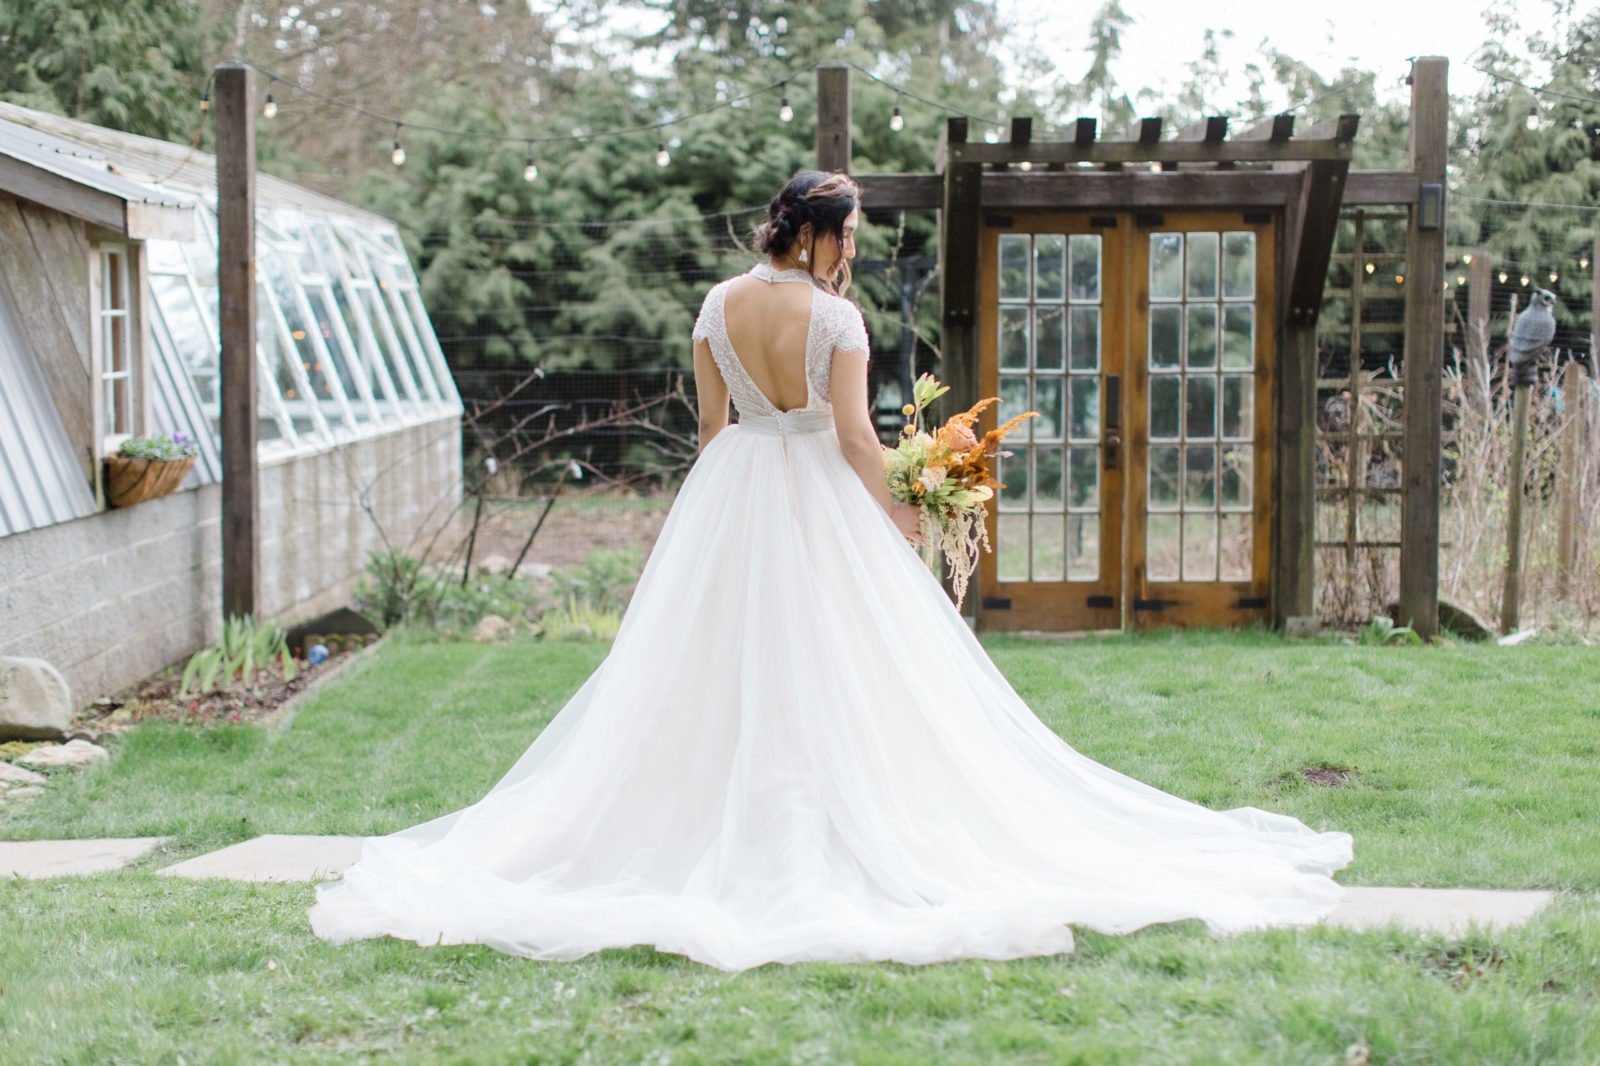 bridal portraits at this outdoor greenhouse wedding, fall wedding inspiration, bright floral bouquet